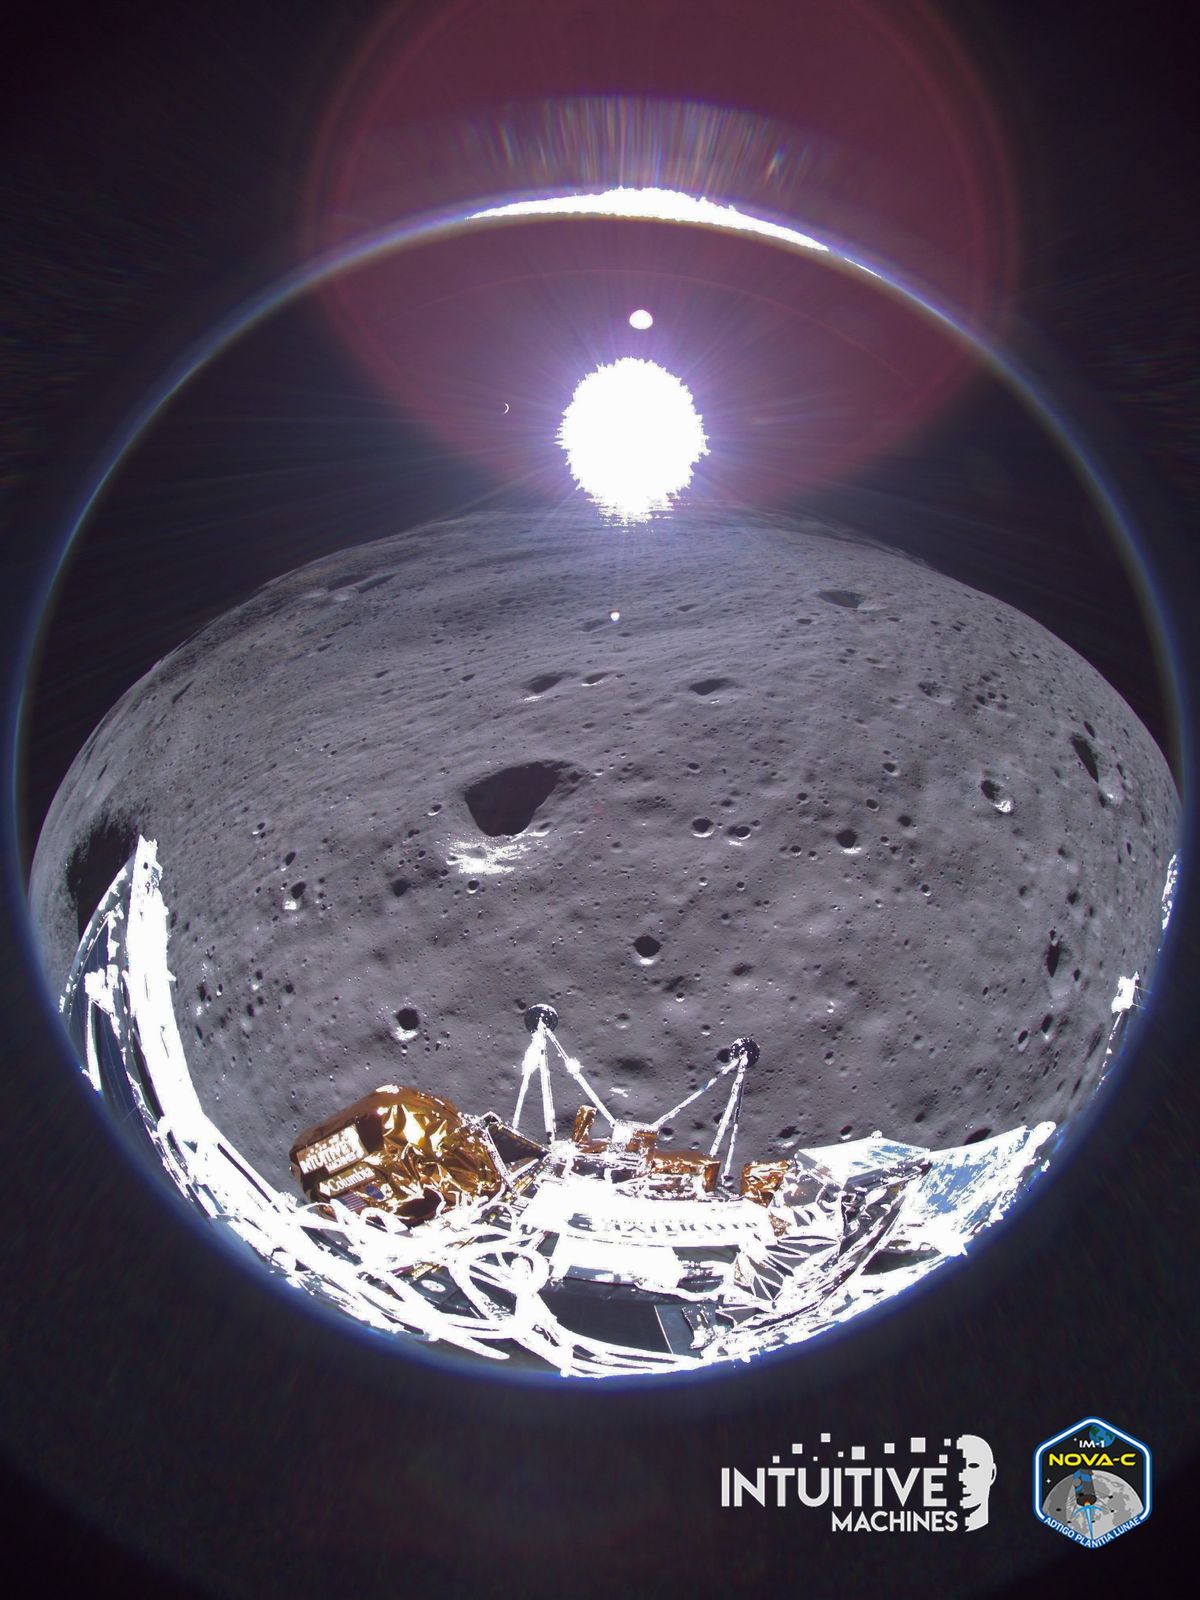 An image from the Intuitive Machines lunar lander Odysseus, with the cresecent Earth in the background.